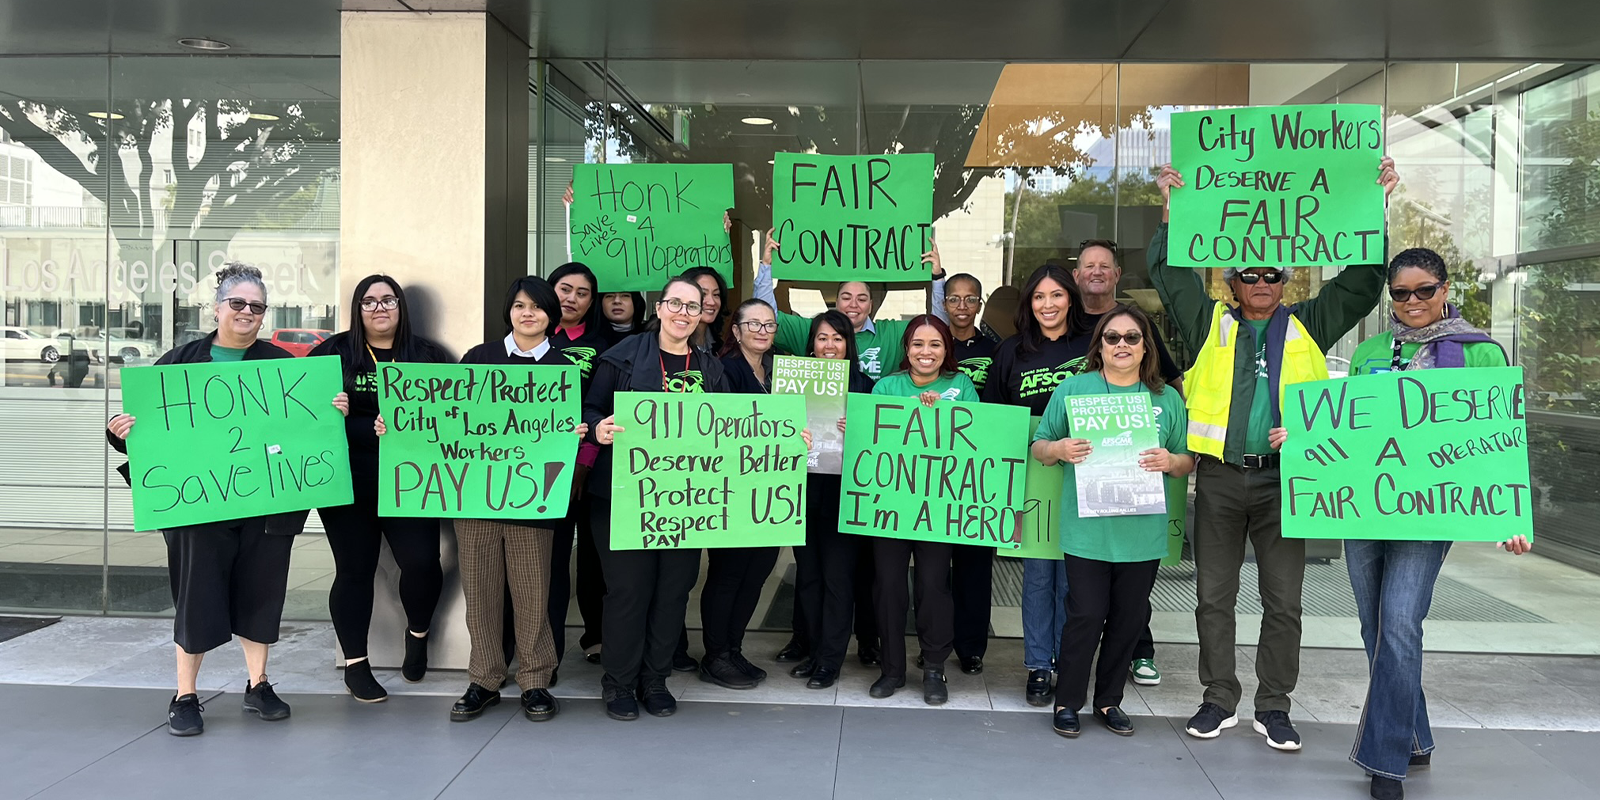 Service & Solidarity Spotlight: Los Angeles City Workers Ratify Contracts with Robust Wage Increases